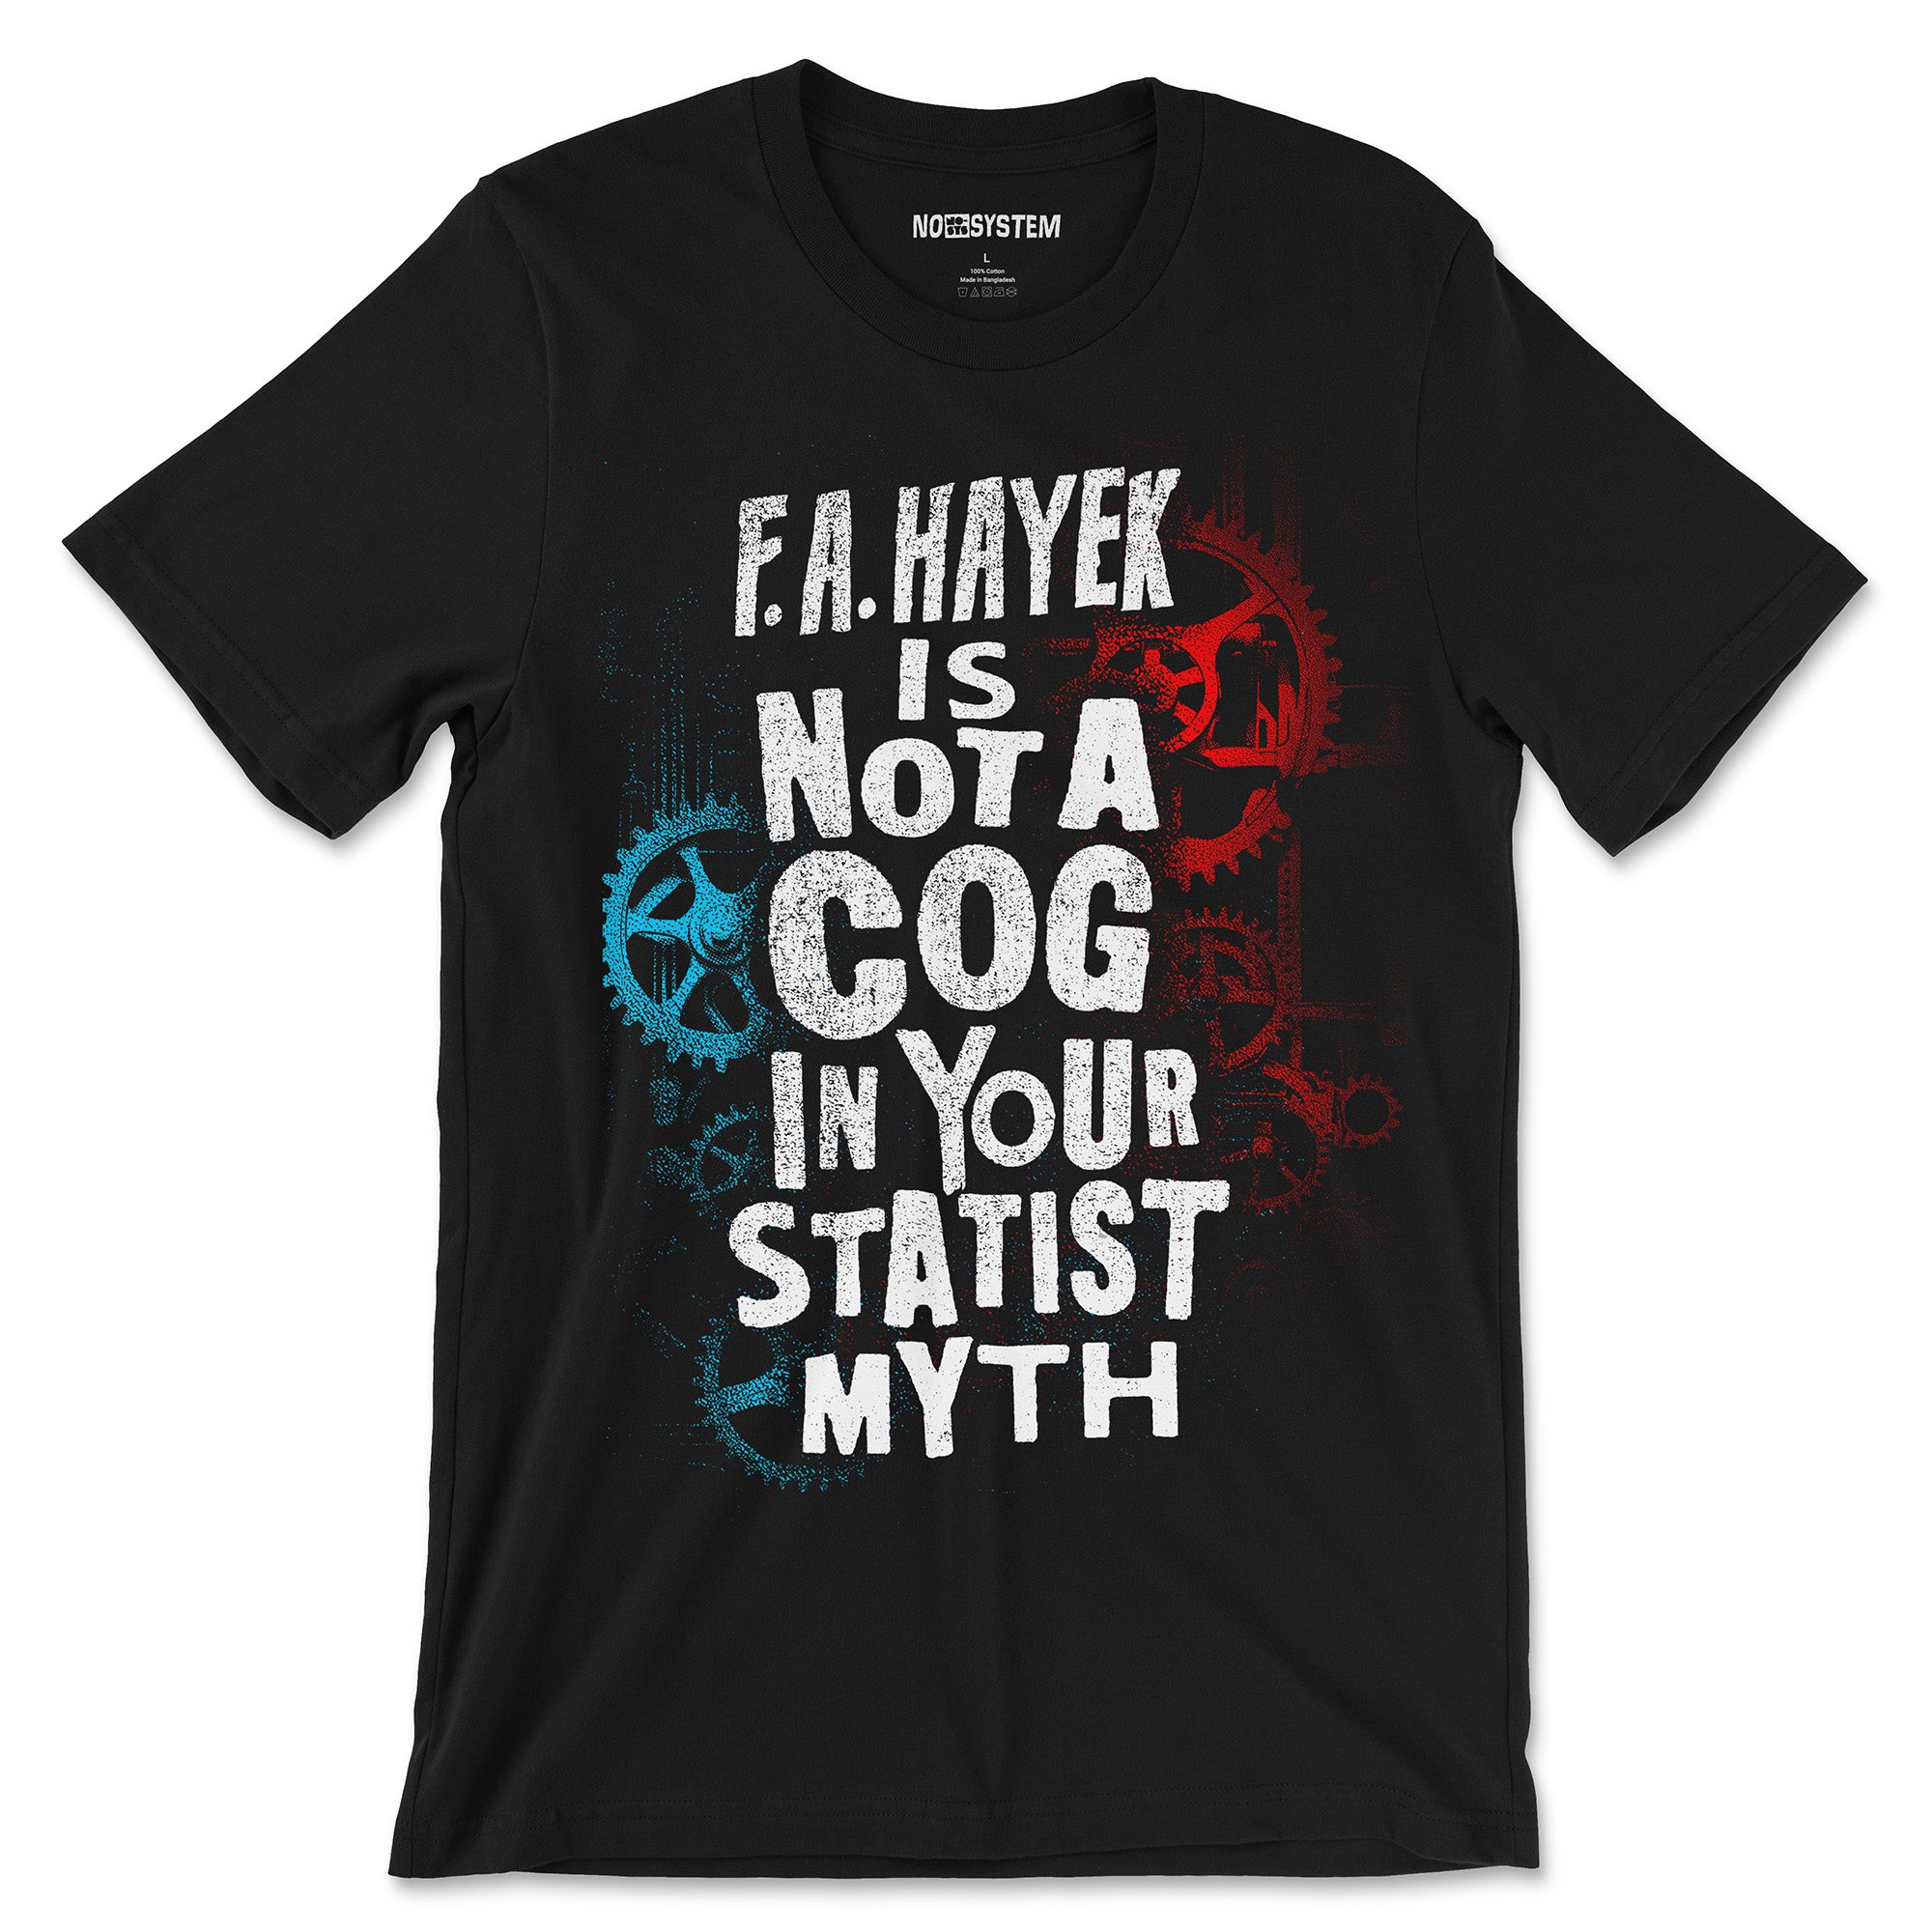 F.A. Hayek Is Not a Cog in Your Statist Myth Crewneck T-shirt